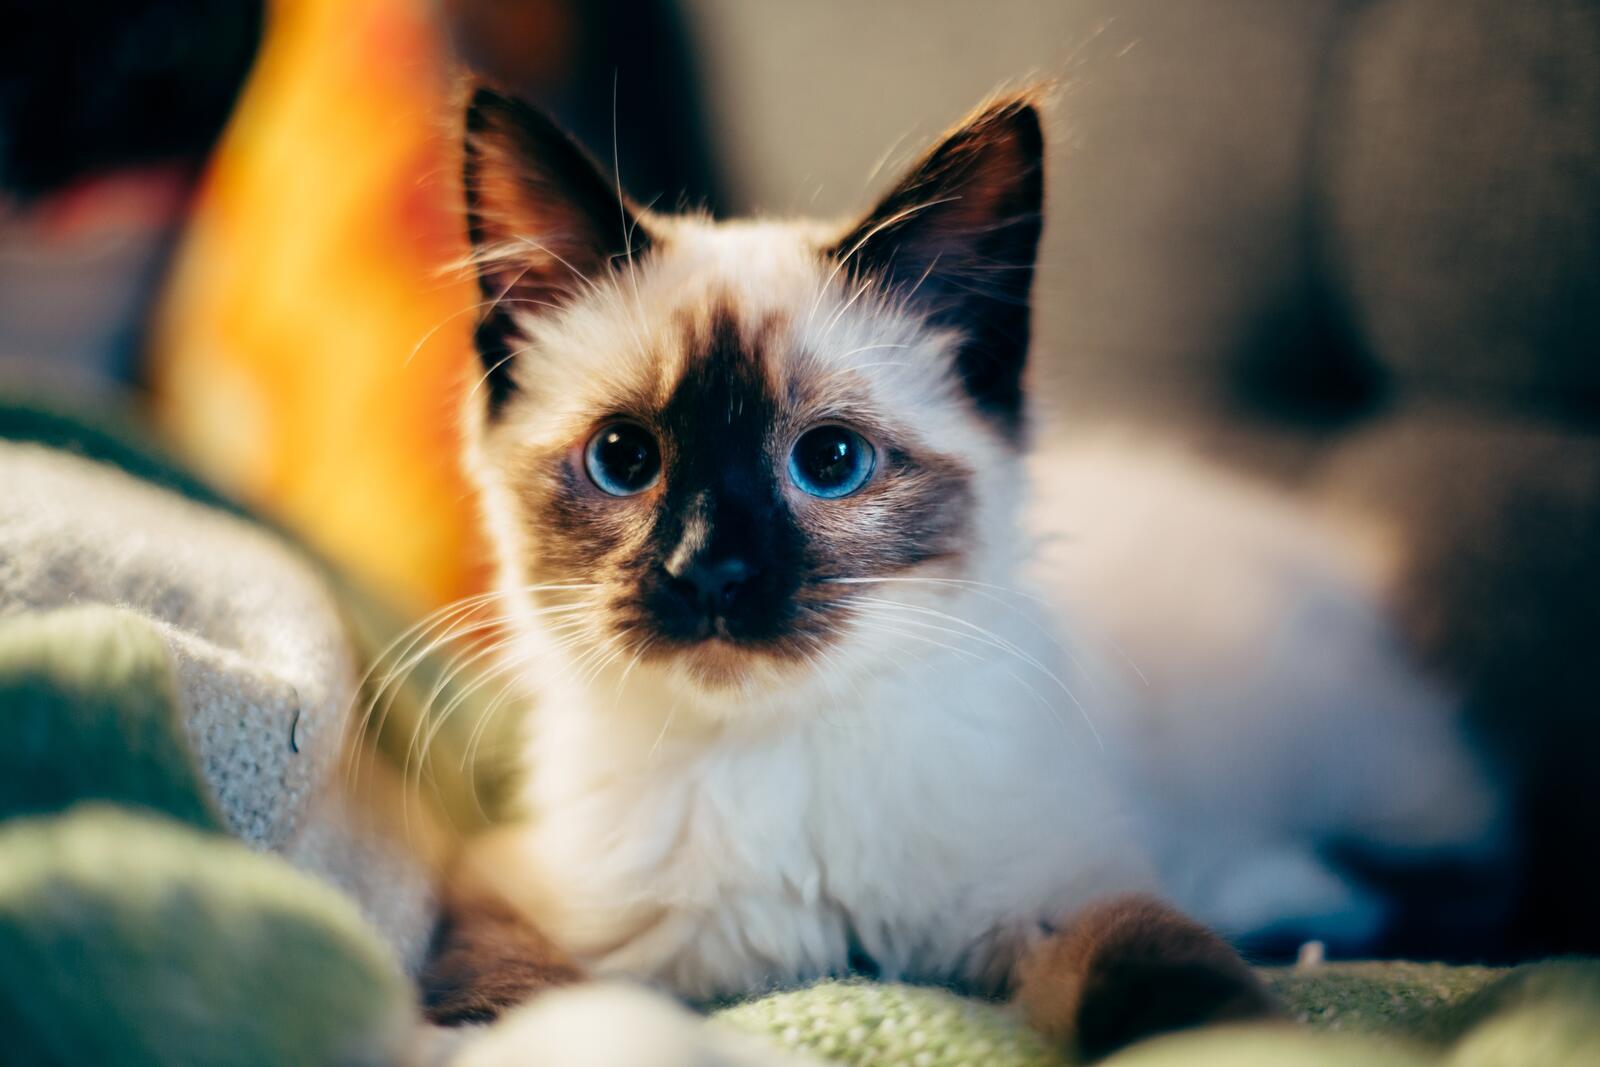 Wallpapers wallpaper siamese cat adorable cats on the desktop